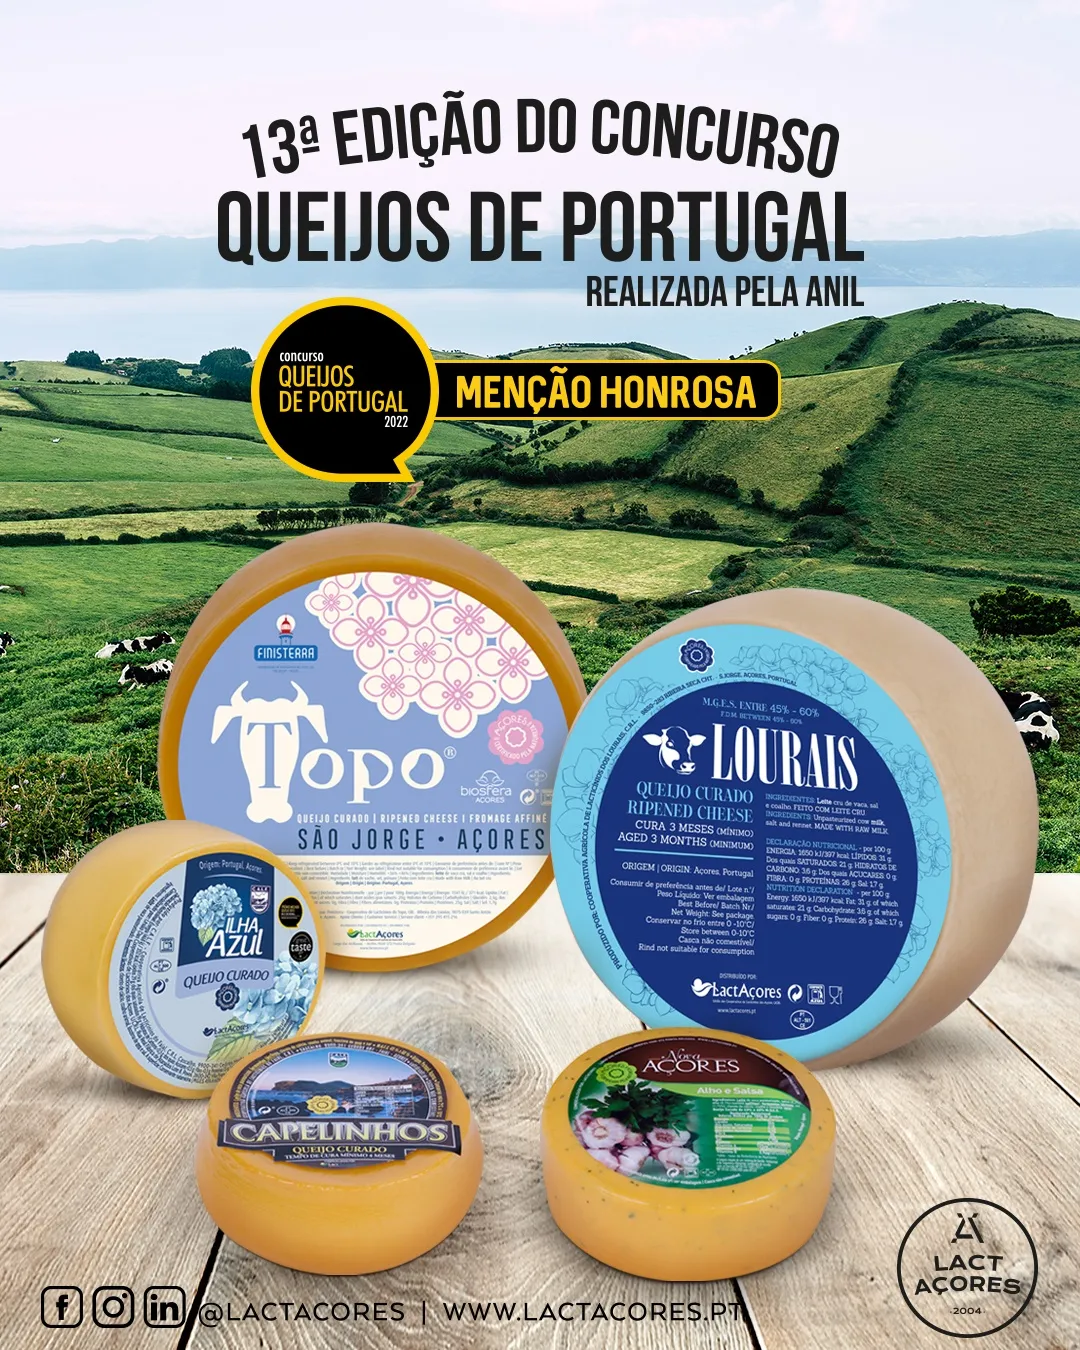 São Miguel Island Cheese 9M and Nova Açores soft cheese elected best cheese of Portugal 2022